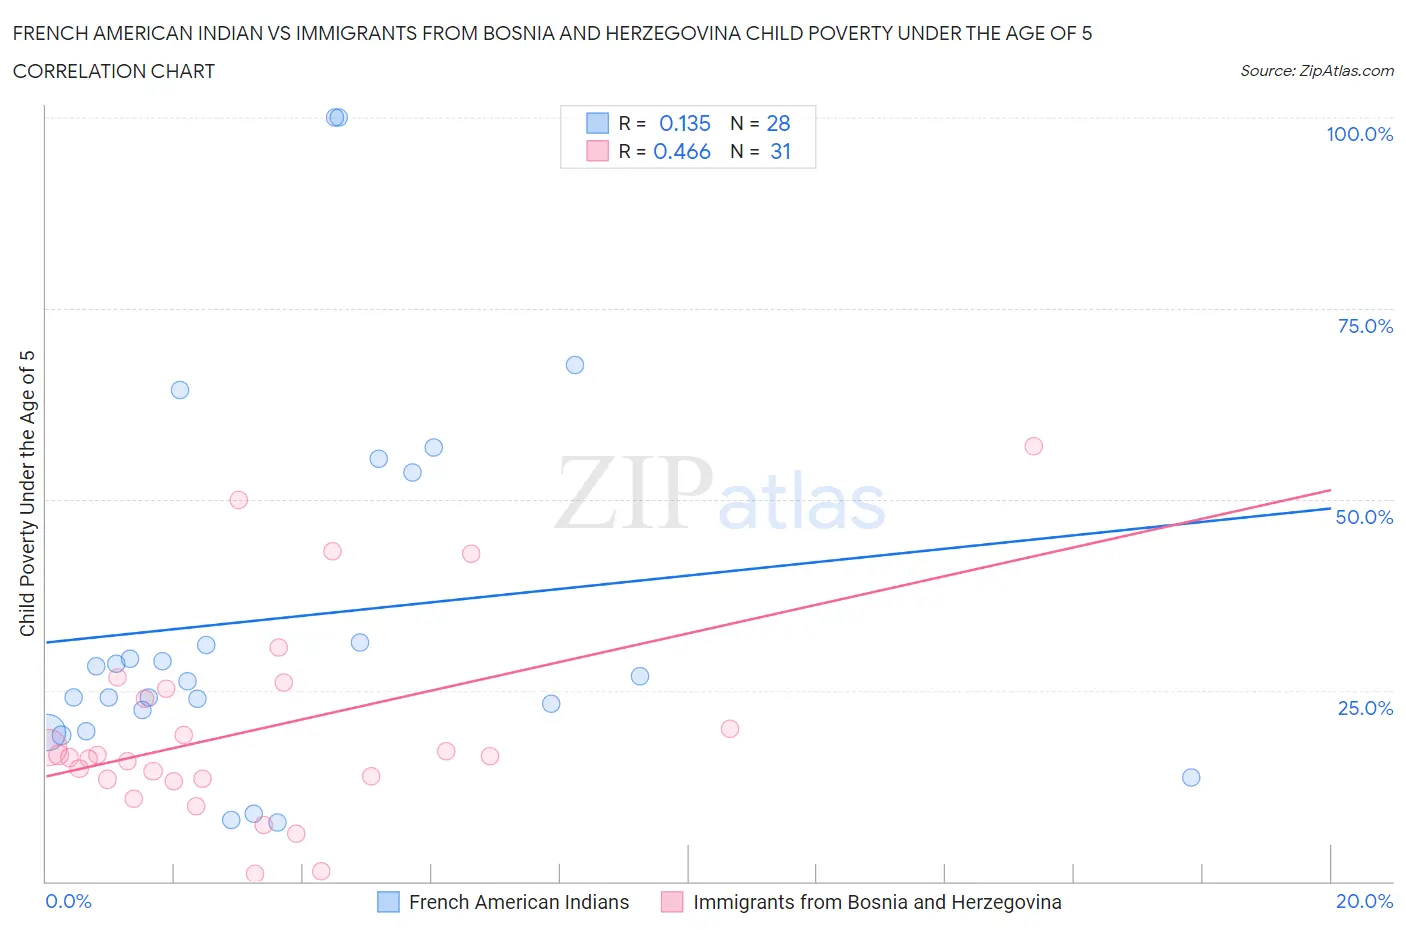 French American Indian vs Immigrants from Bosnia and Herzegovina Child Poverty Under the Age of 5